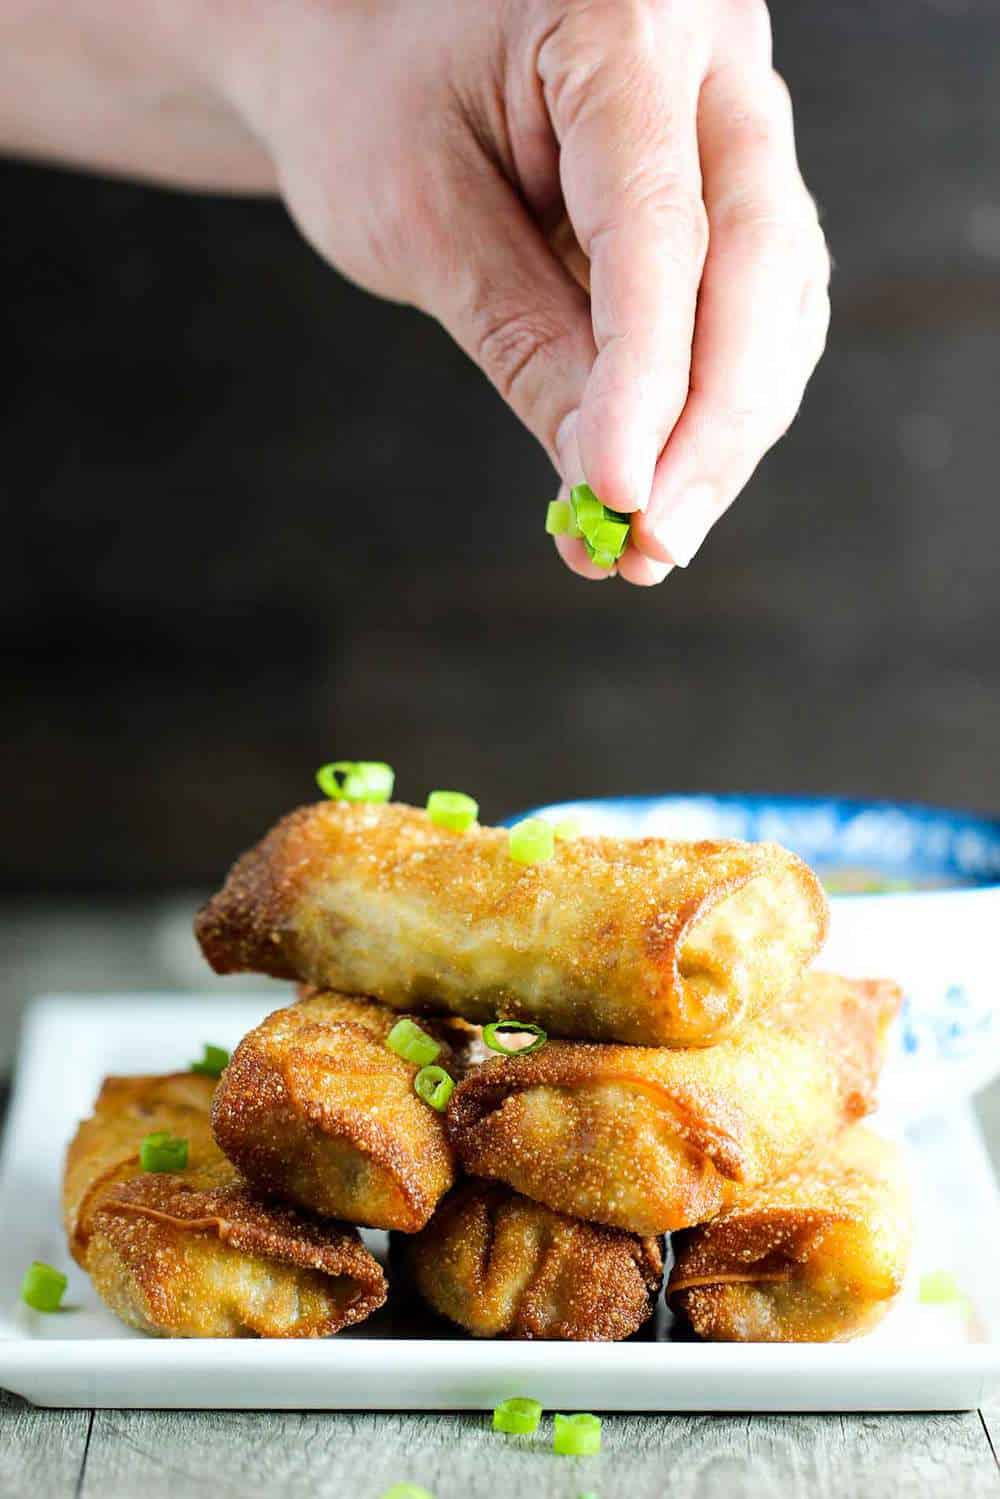 homemade eggs rolls are our favorite Chinese take-out dish at home